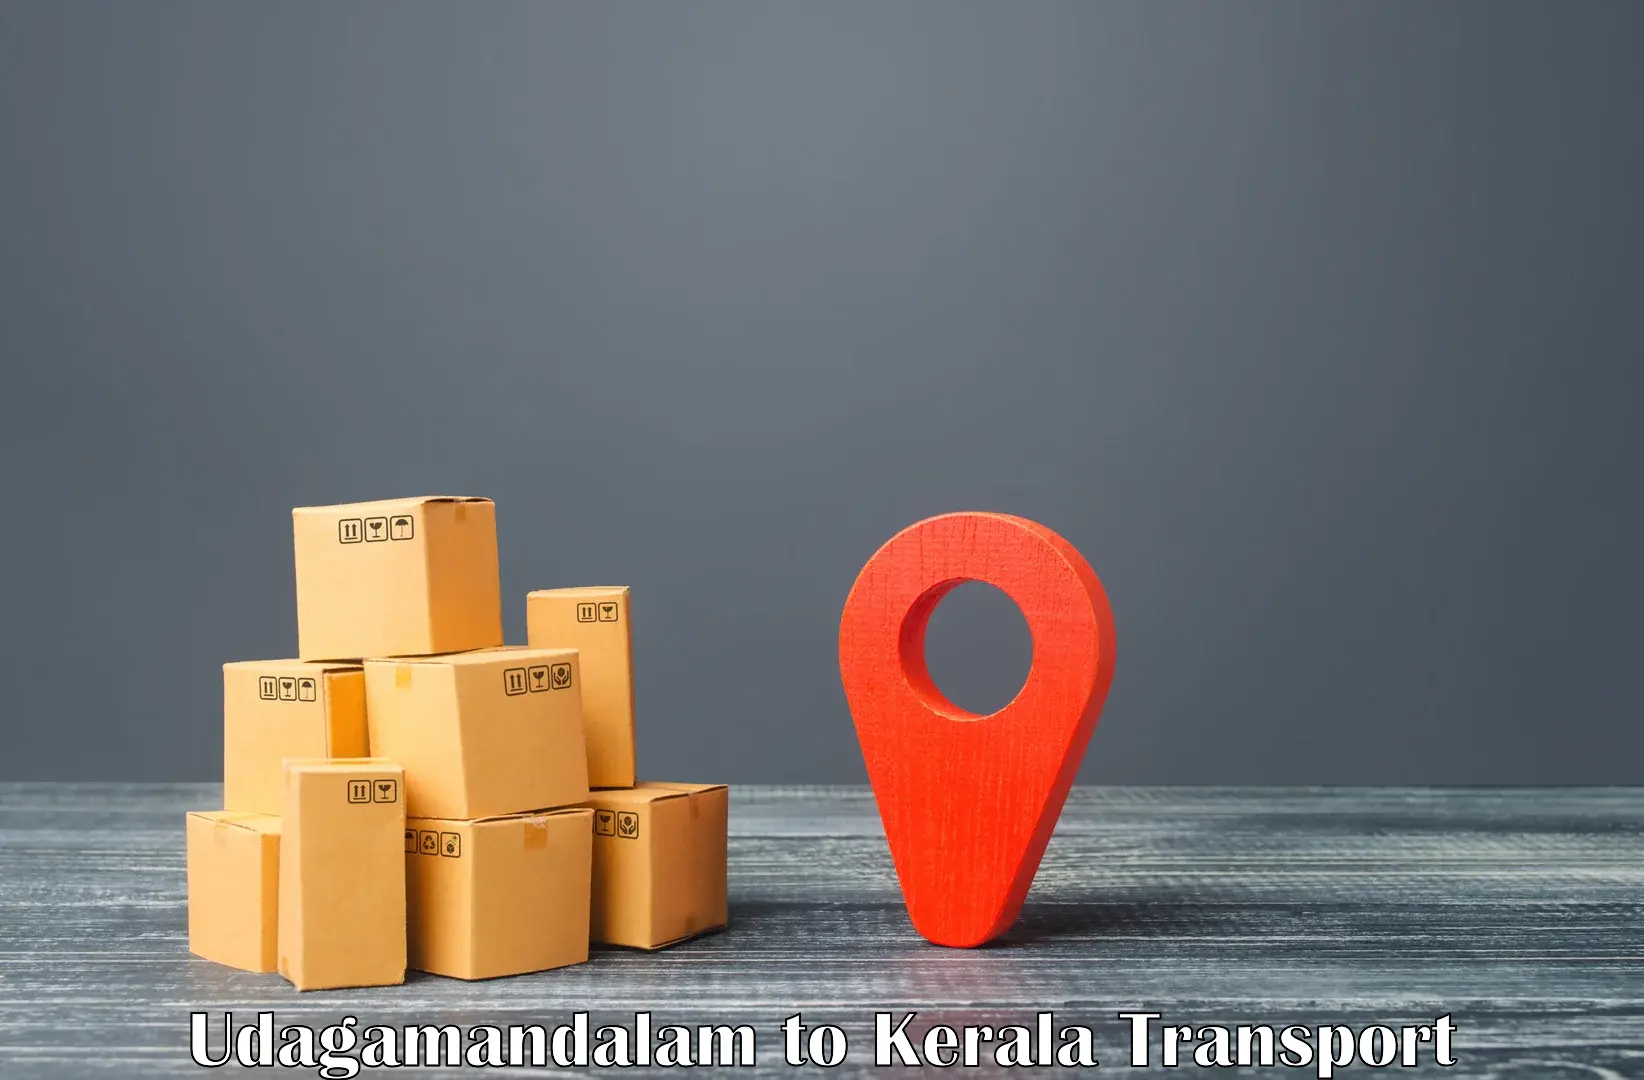 Online transport booking in Udagamandalam to Perinthalmanna